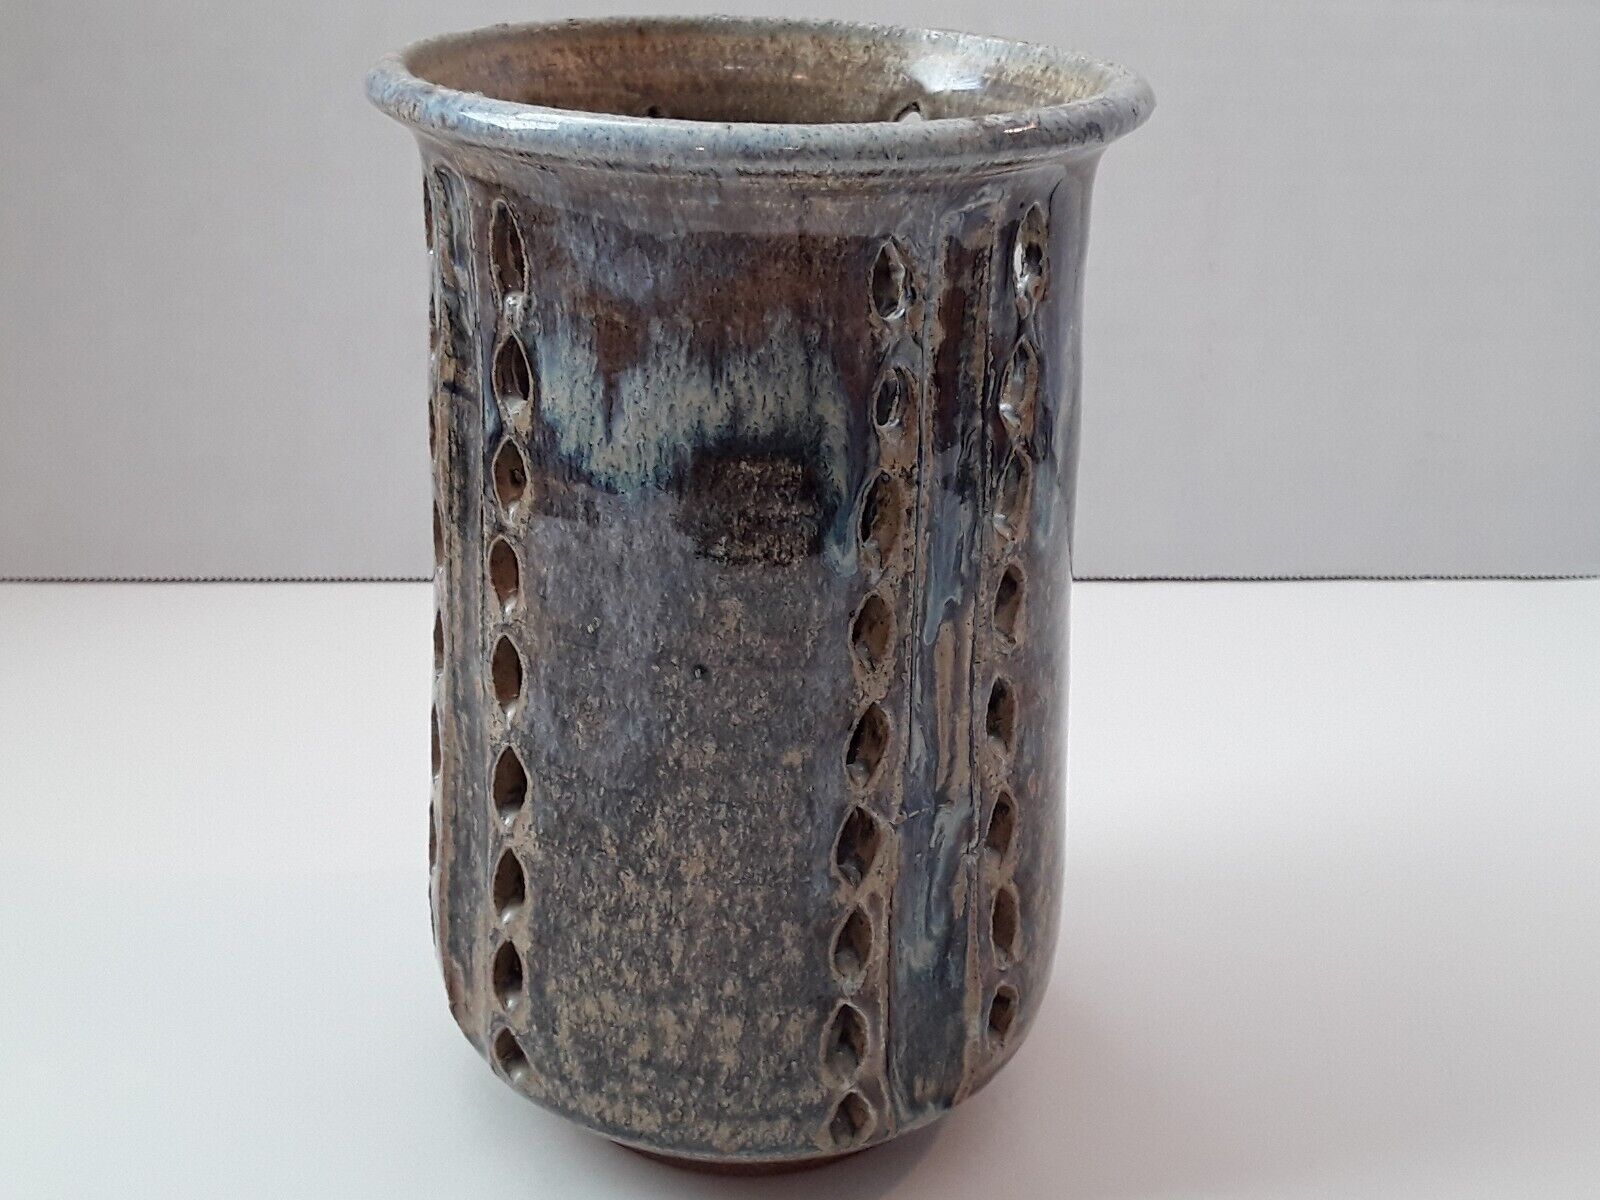 PIQUE FLOWER VASE WITH HOLES